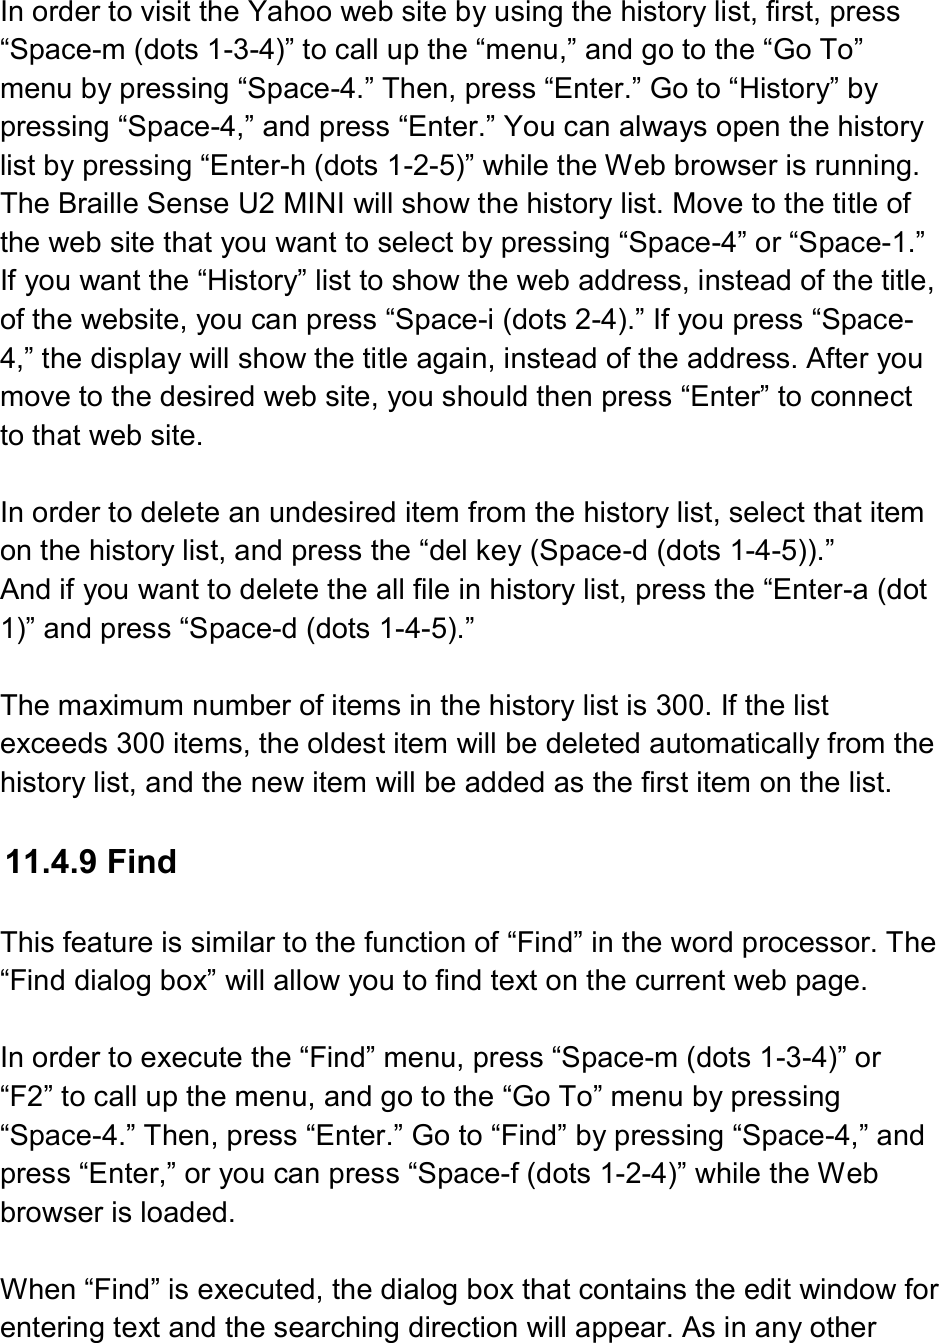   In order to visit the Yahoo web site by using the history list, first, press “Space-m (dots 1-3-4)” to call up the “menu,” and go to the “Go To” menu by pressing “Space-4.” Then, press “Enter.” Go to “History” by pressing “Space-4,” and press “Enter.” You can always open the history list by pressing “Enter-h (dots 1-2-5)” while the Web browser is running. The Braille Sense U2 MINI will show the history list. Move to the title of the web site that you want to select by pressing “Space-4” or “Space-1.” If you want the “History” list to show the web address, instead of the title, of the website, you can press “Space-i (dots 2-4).” If you press “Space-4,” the display will show the title again, instead of the address. After you move to the desired web site, you should then press “Enter” to connect to that web site.  In order to delete an undesired item from the history list, select that item on the history list, and press the “del key (Space-d (dots 1-4-5)).” And if you want to delete the all file in history list, press the “Enter-a (dot 1)” and press “Space-d (dots 1-4-5).”  The maximum number of items in the history list is 300. If the list exceeds 300 items, the oldest item will be deleted automatically from the history list, and the new item will be added as the first item on the list.  11.4.9 Find  This feature is similar to the function of “Find” in the word processor. The “Find dialog box” will allow you to find text on the current web page.  In order to execute the “Find” menu, press “Space-m (dots 1-3-4)” or “F2” to call up the menu, and go to the “Go To” menu by pressing “Space-4.” Then, press “Enter.” Go to “Find” by pressing “Space-4,” and press “Enter,” or you can press “Space-f (dots 1-2-4)” while the Web browser is loaded.  When “Find” is executed, the dialog box that contains the edit window for entering text and the searching direction will appear. As in any other 